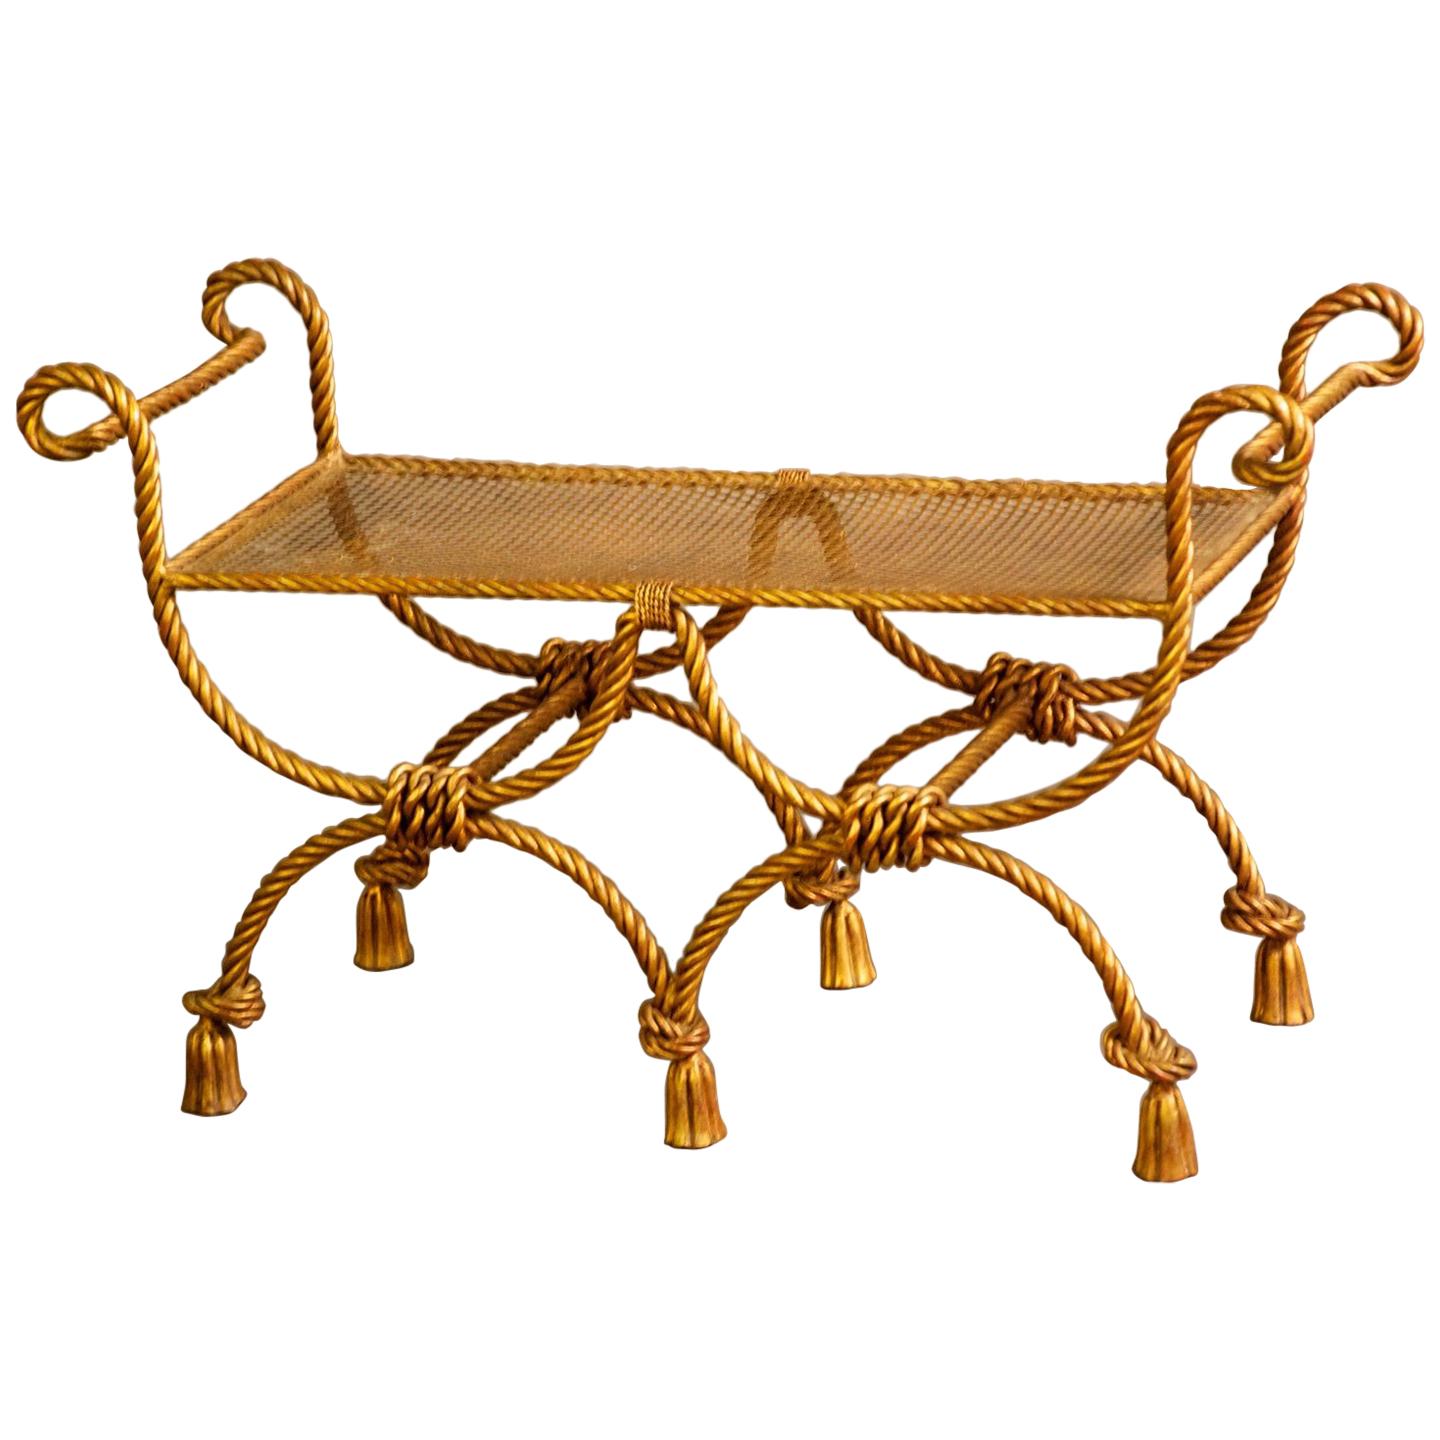 Niccolini Gilt Iron Two-Seat Bench For Sale